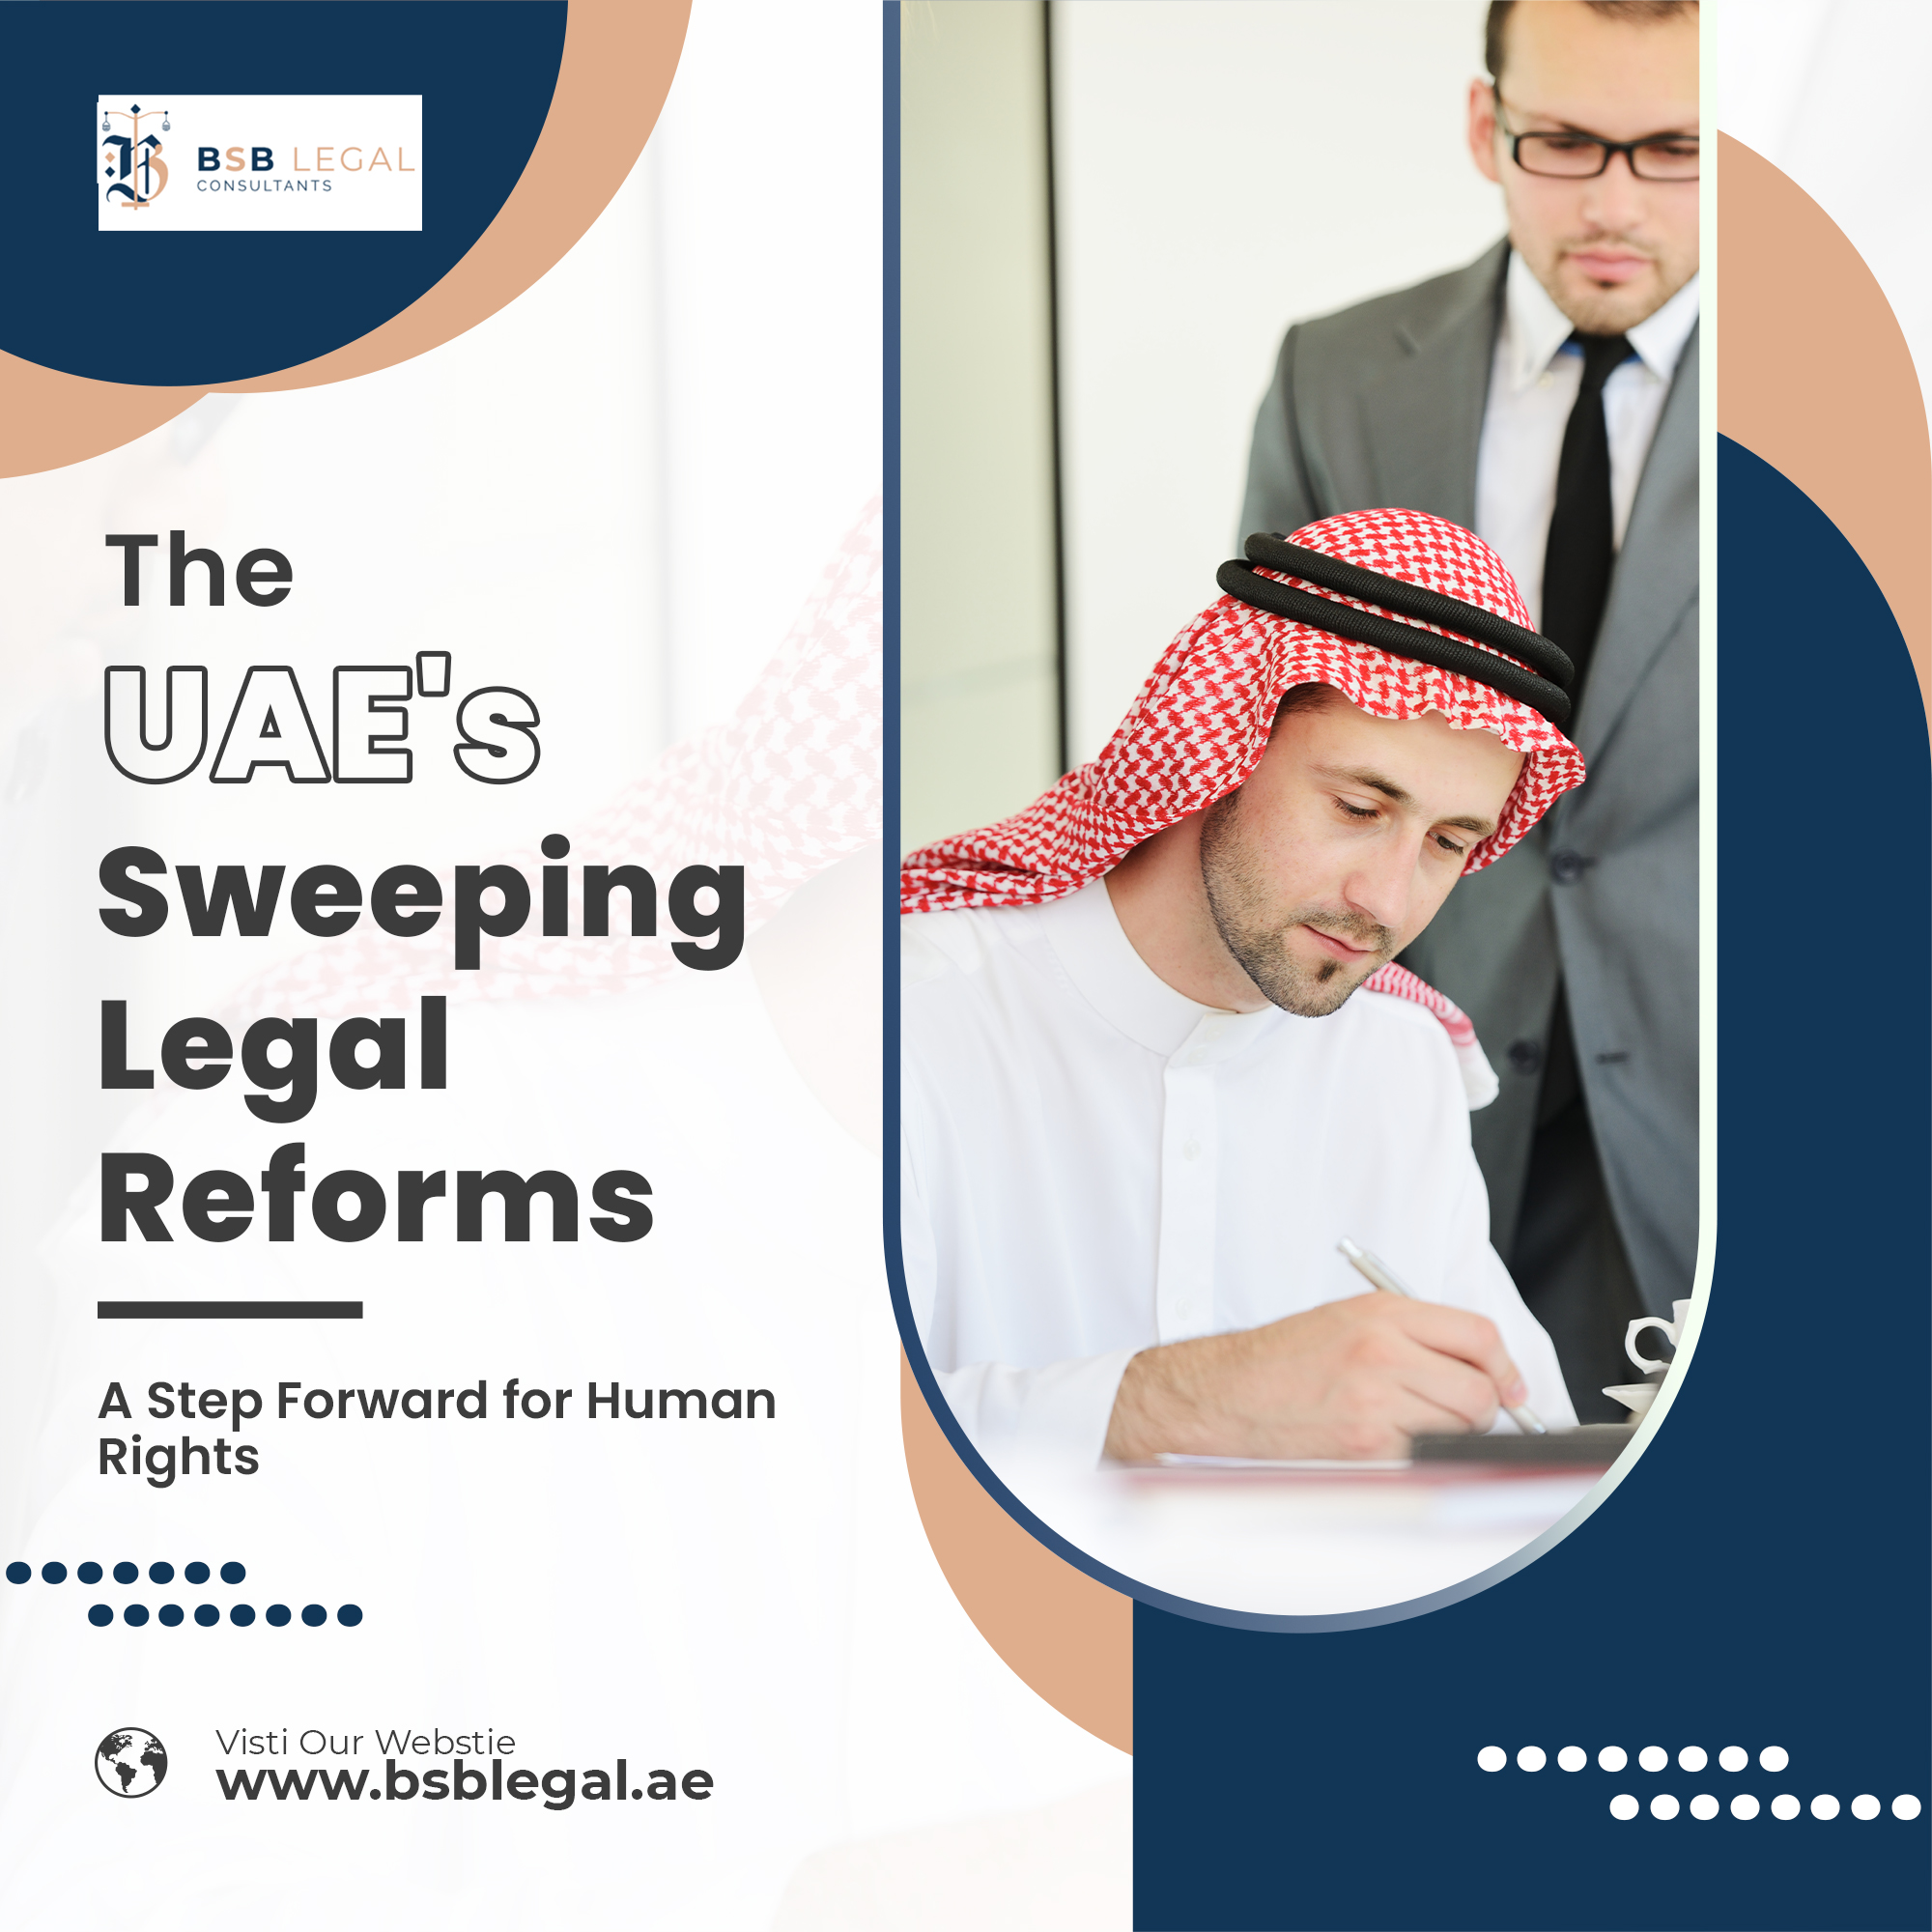 The UAE's Sweeping Legal Reforms: A Step Forward for Human Rights